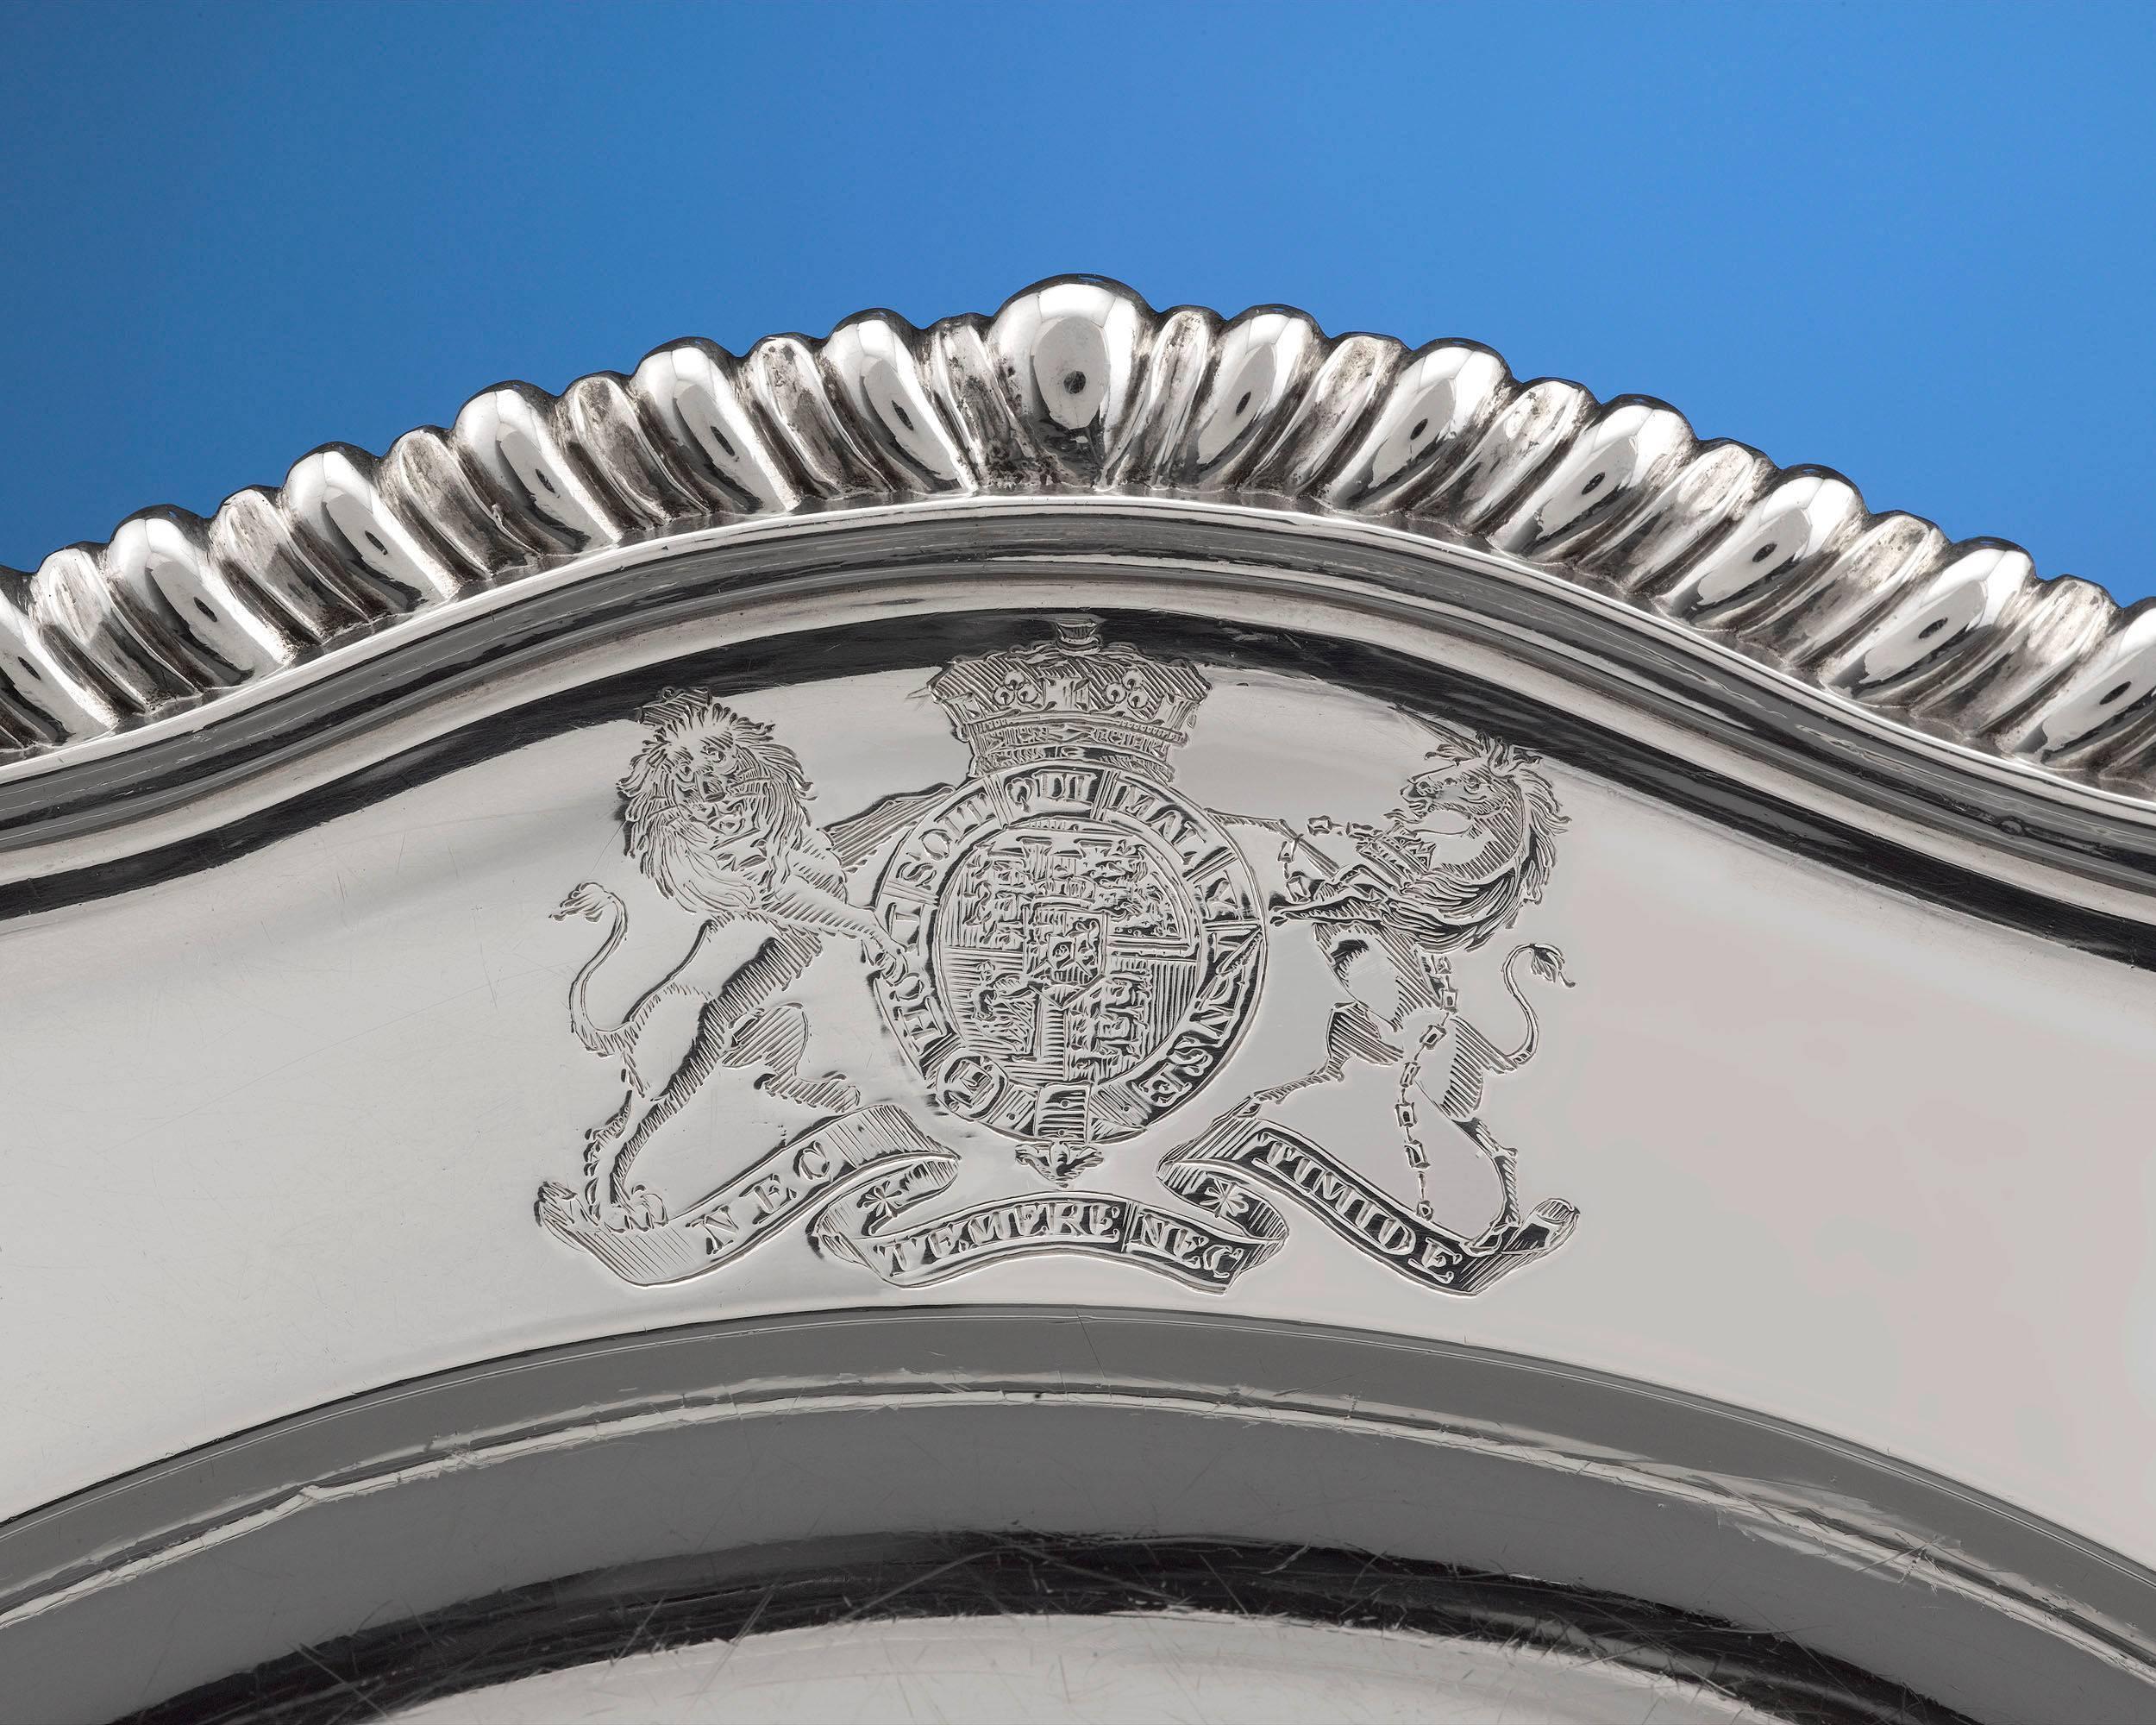 The royal coat of arms is majestically displayed on these beautiful silver plates by highly-regarded London silversmith William Elliott. The plates are skillfully fashioned with gadrooned and scalloped edges. Of particular interest is the coat of